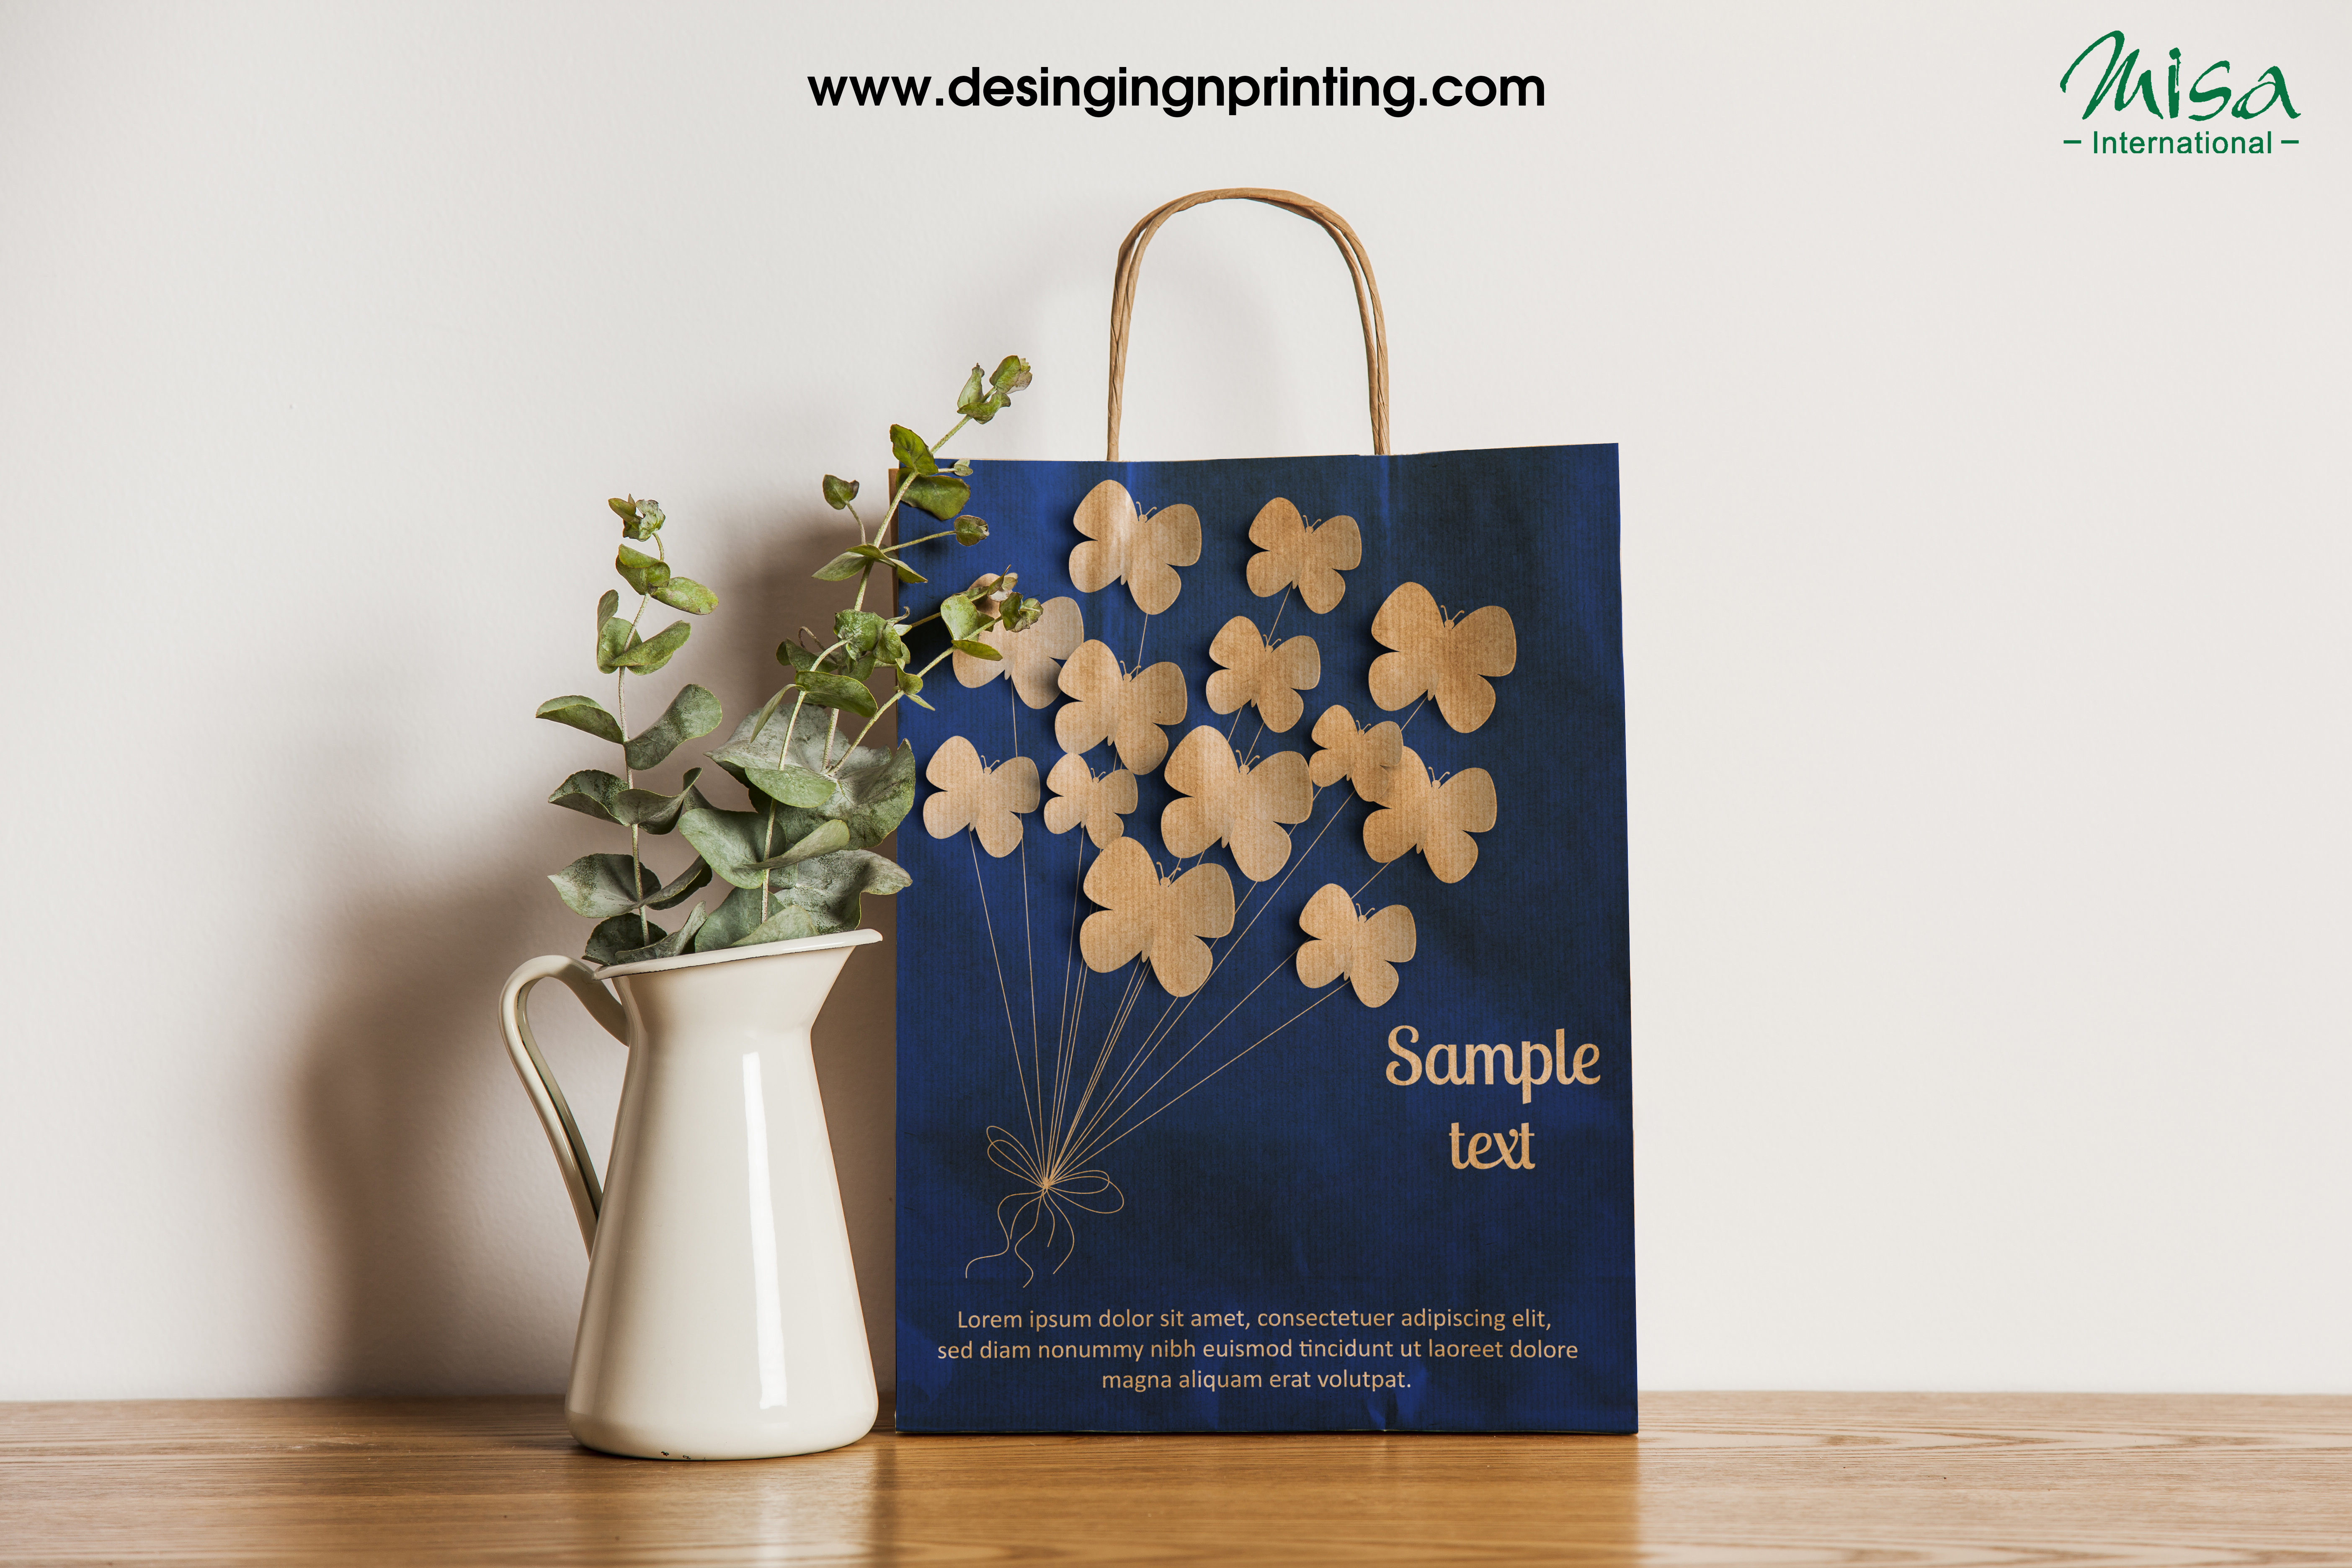 We are a leading Manufacturer & Supplier of Designer Paper Bags such as Printed Paper Bags,Multicolor Paper Bags,Custom Designed Bags, Fancy Paper Bags and Cool Paper Bags. Our paper carry bag looks stylish as well as aesthetic, with excellent color combinations. We offer a wide selection of choice in different colors, sizes and shapes.The paper carry bags are highly appreciated by our clients in Australia and U.K. and therefore there is a consistent demand for our paper carry bags.